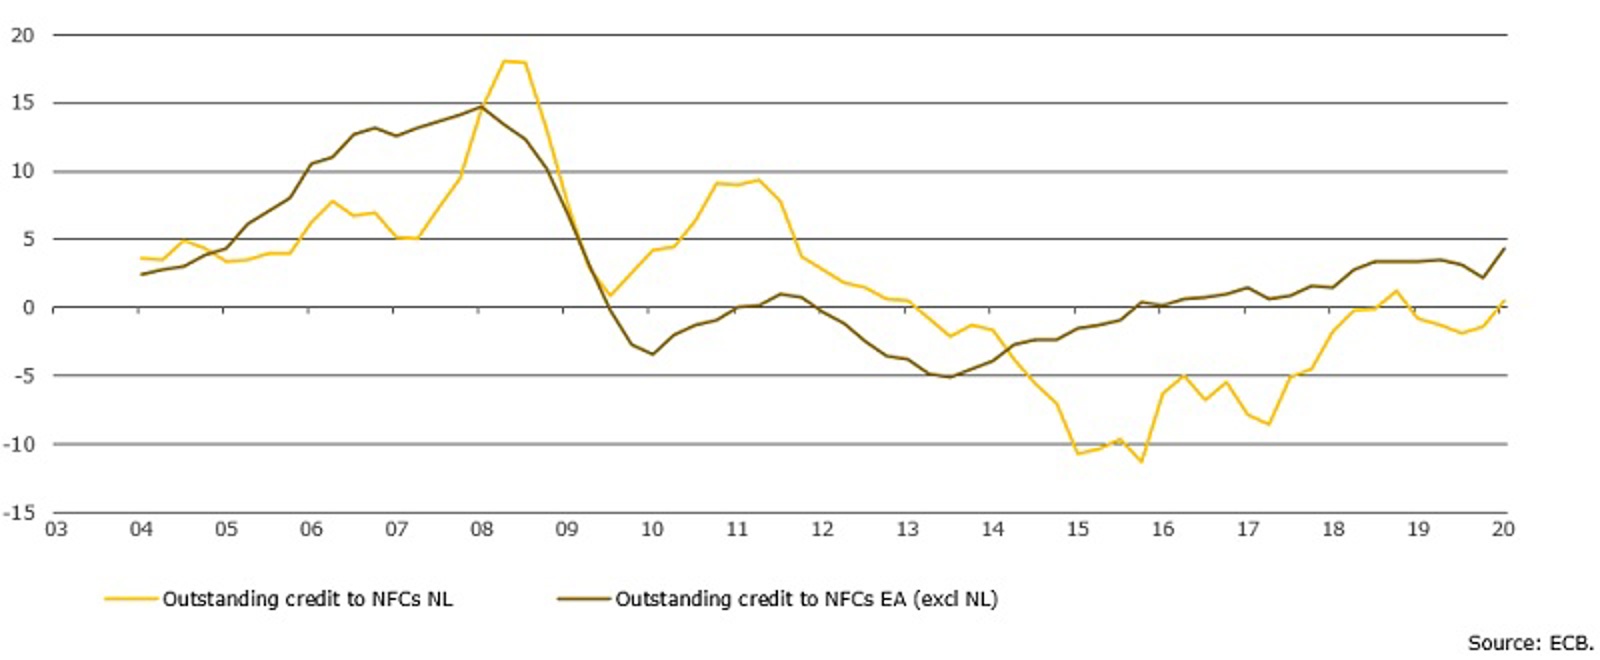 Growth of corporate bank lending in NL and EA